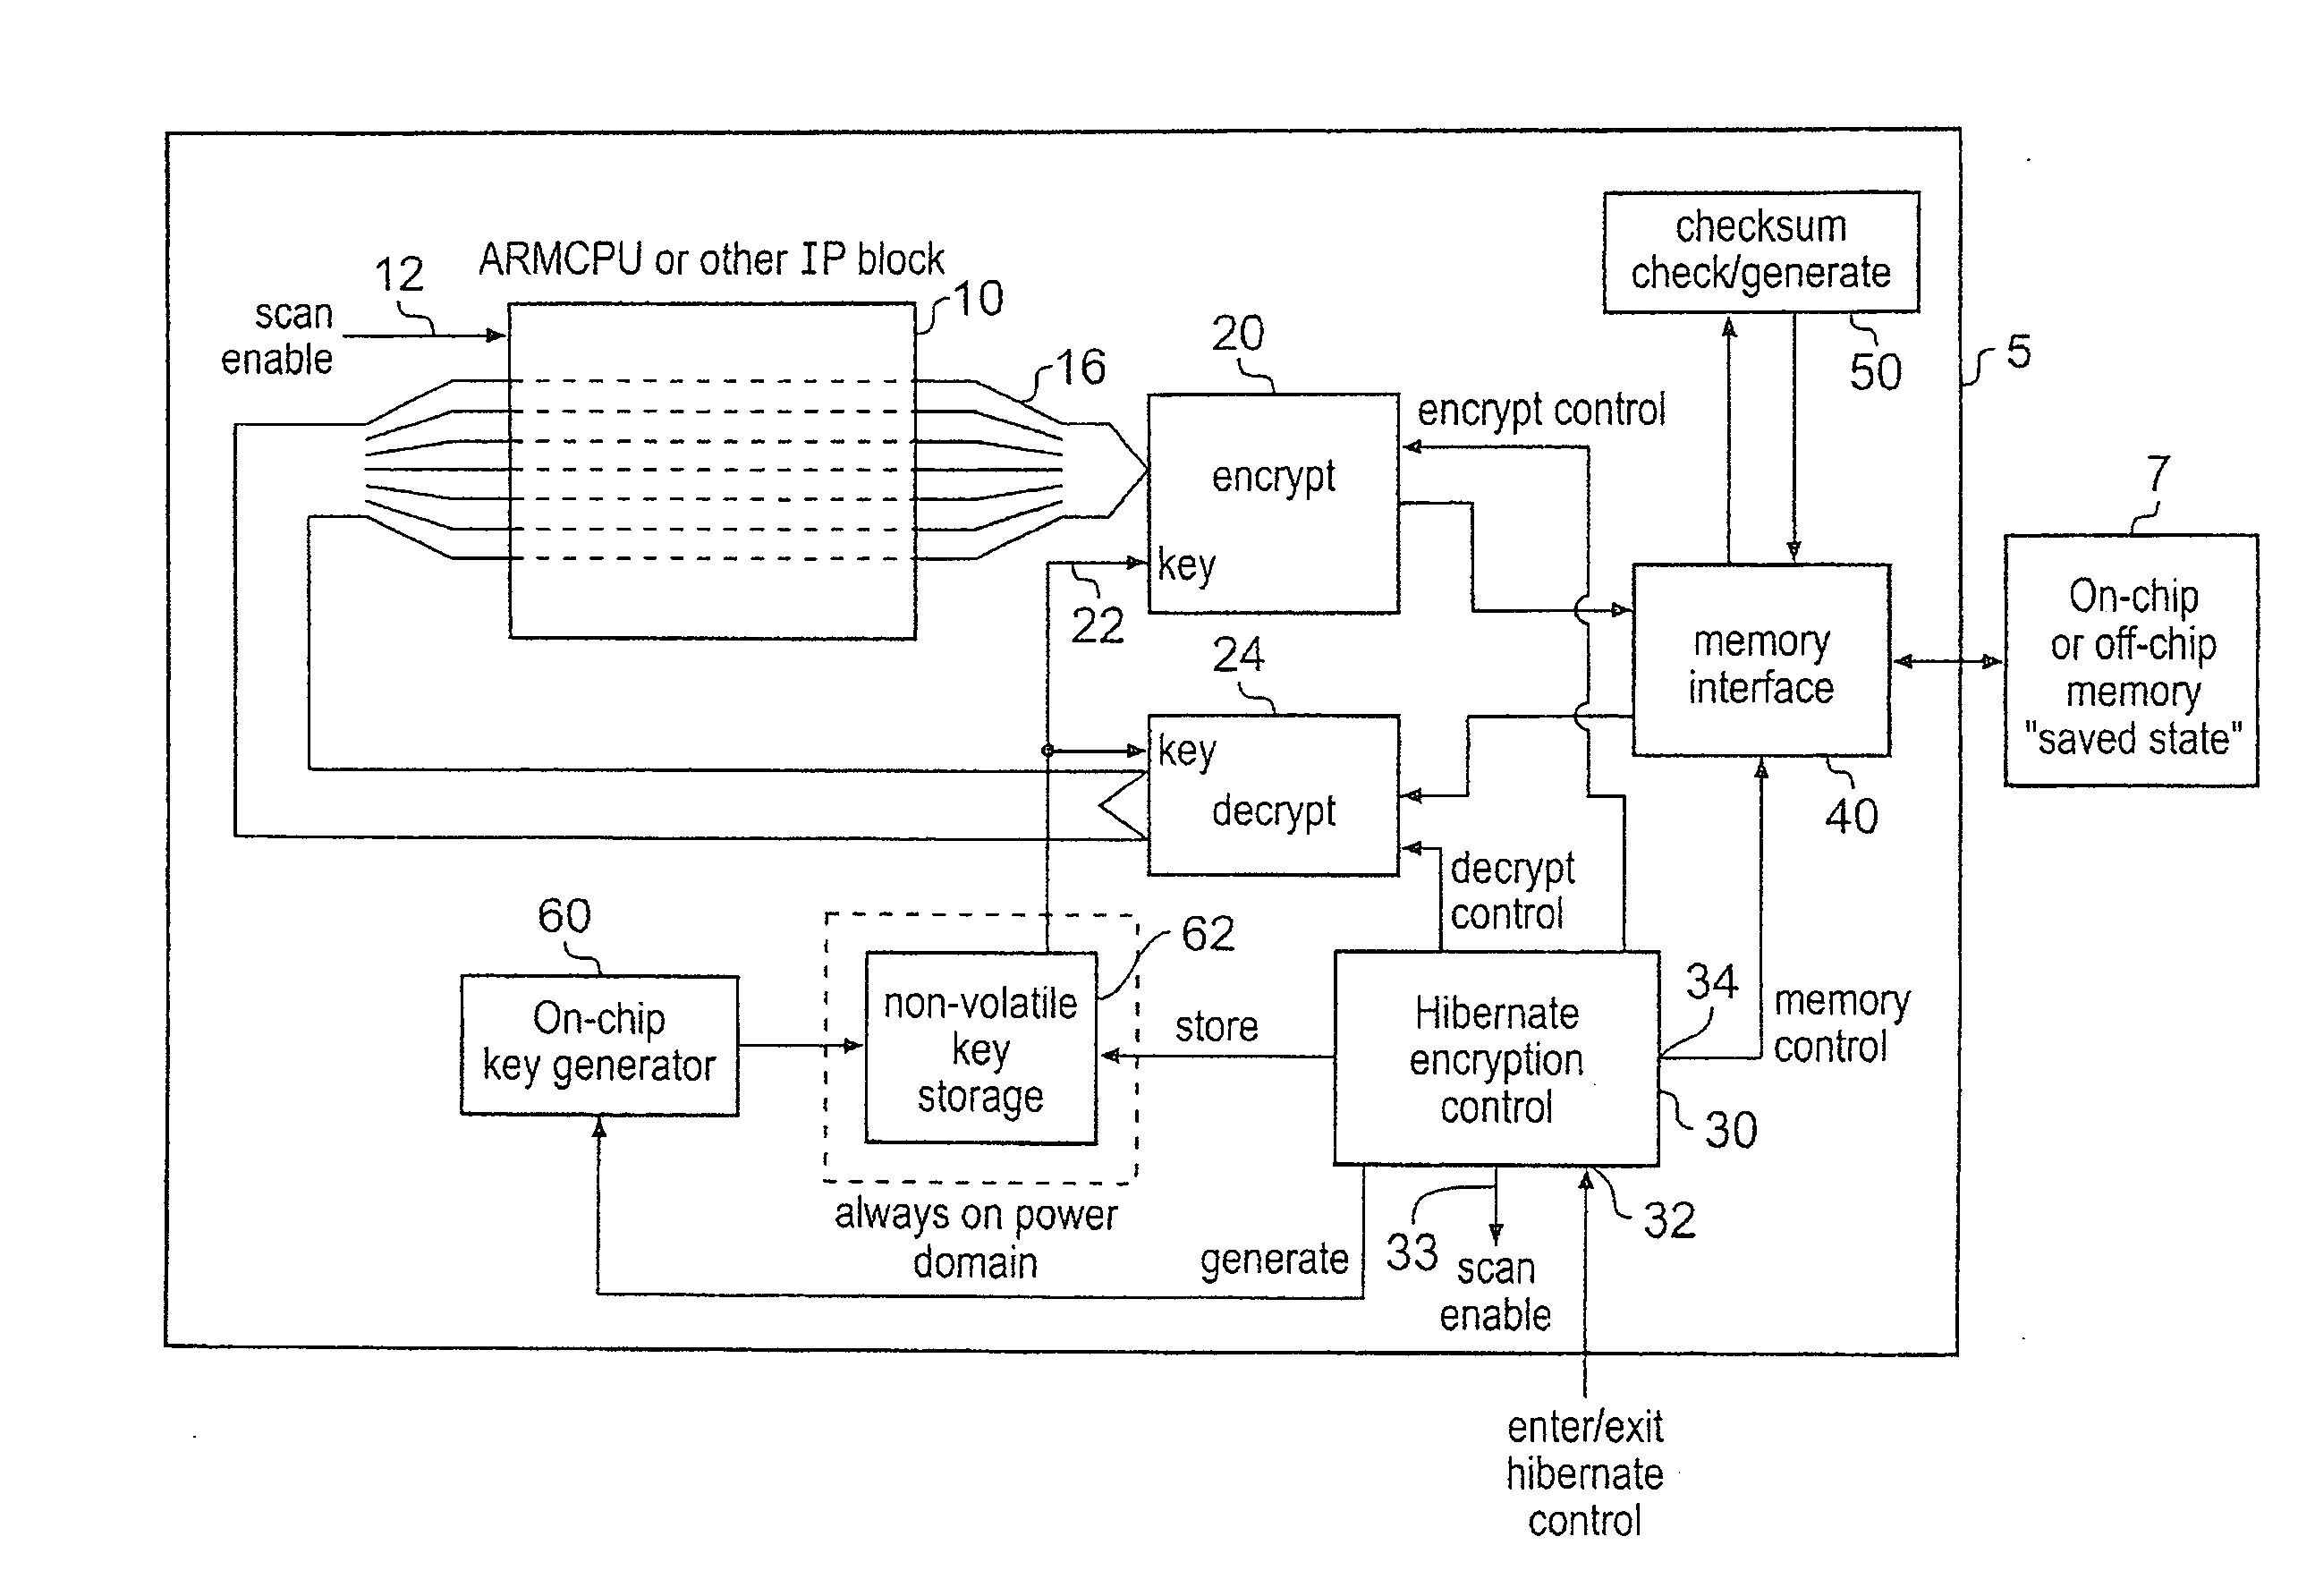 Hibernating a processing apparatus for processing secure data